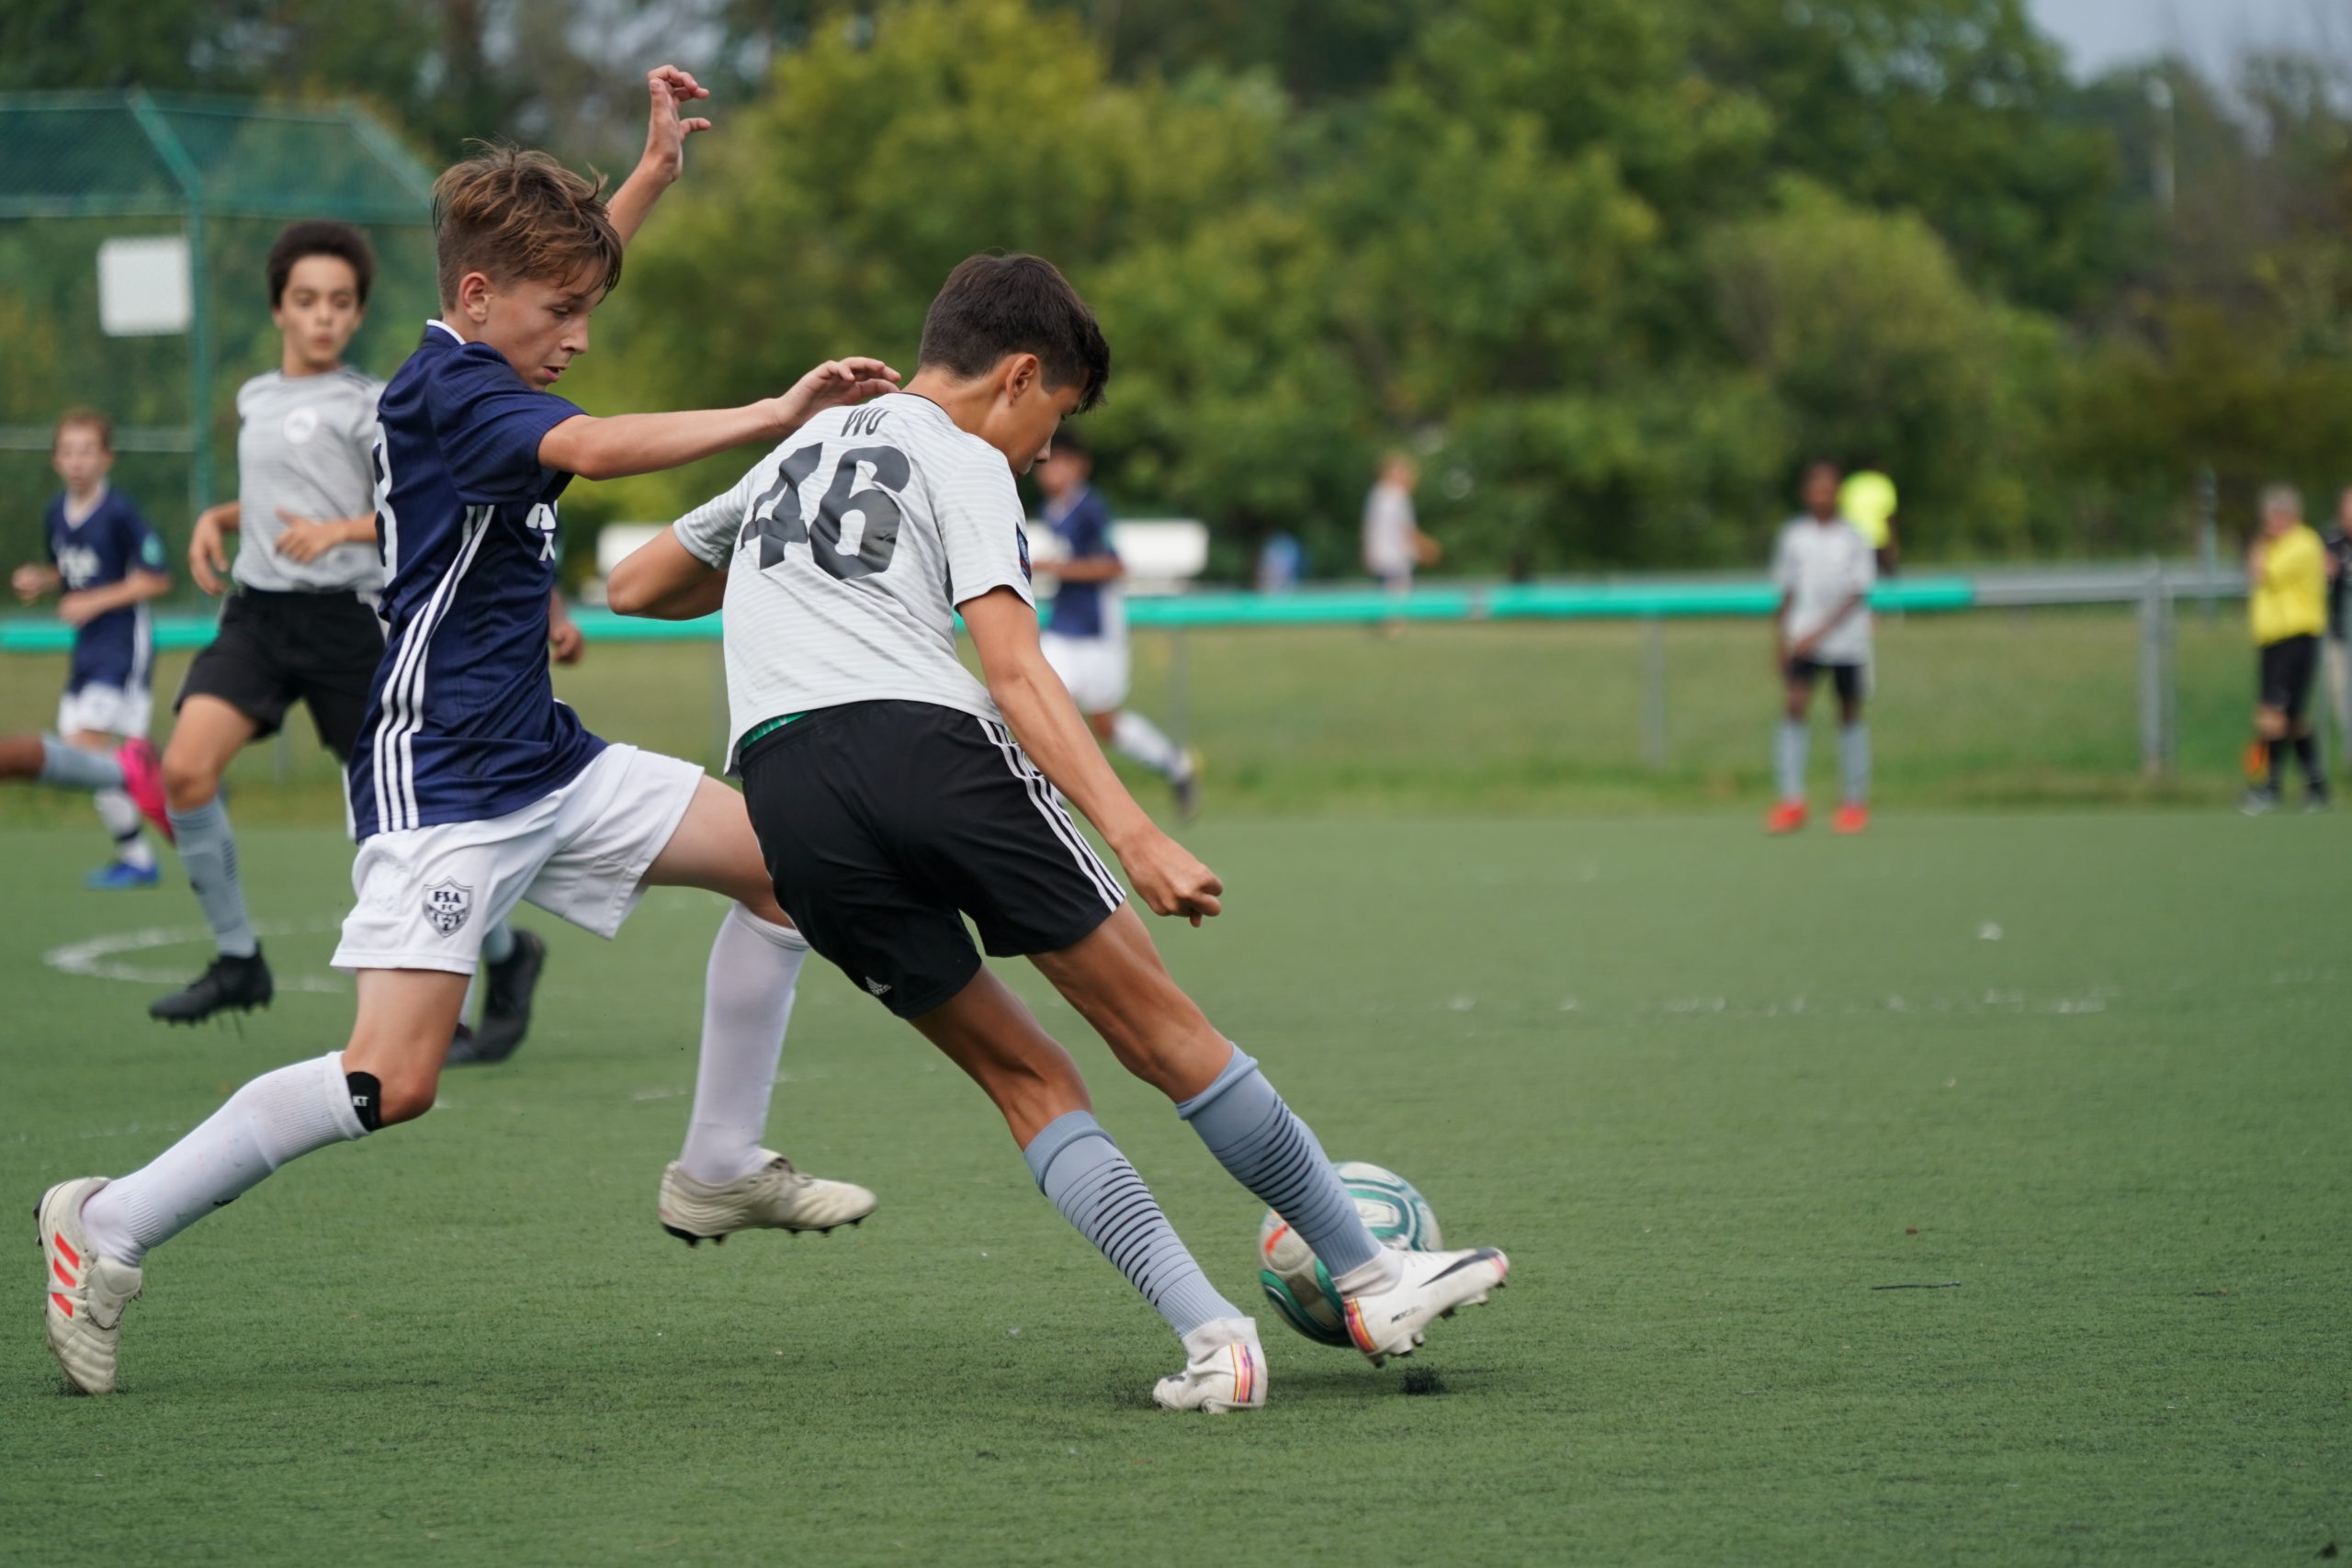 NYC's Largest Soccer Club | All Ages & Competition | Manhattan Soccer Club